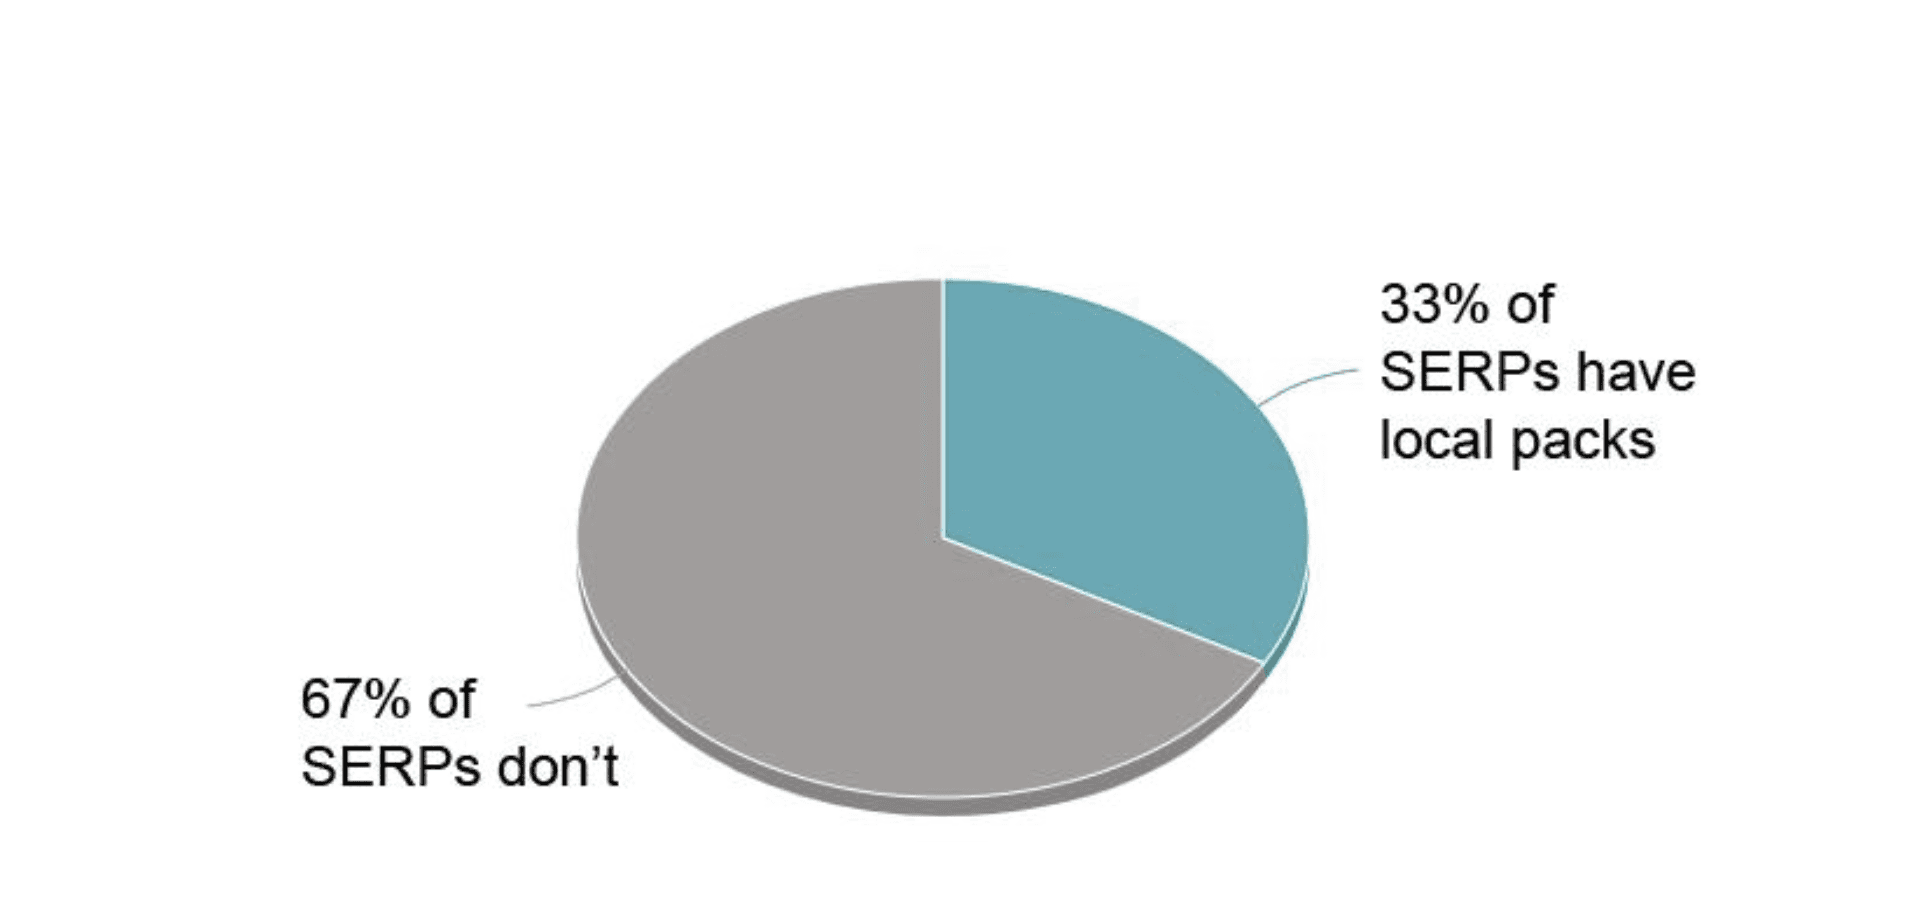 Pie chart showing 33% of SERPs have local packs